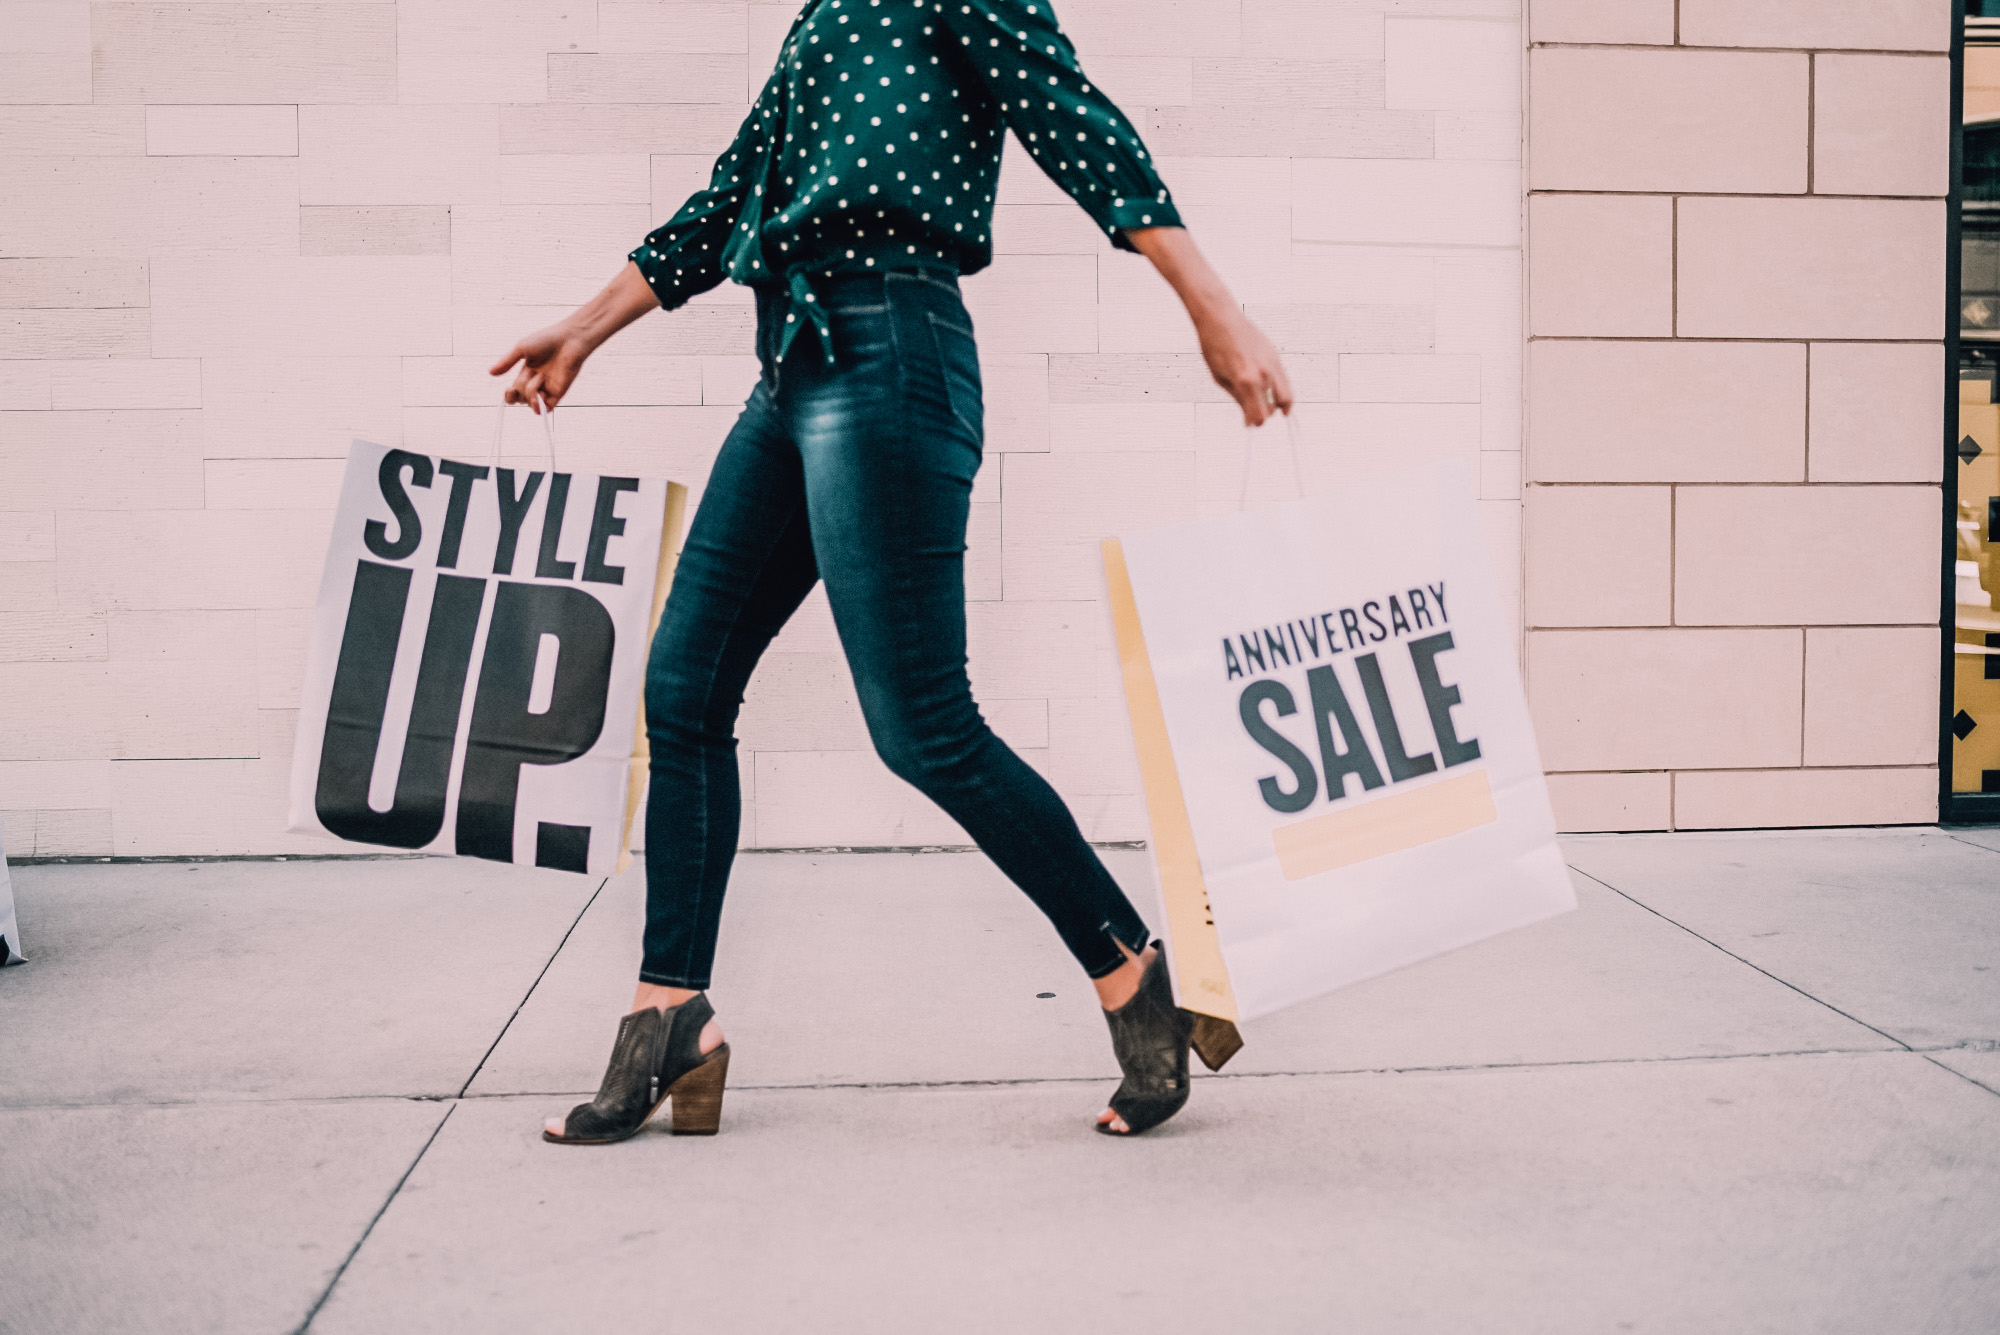 nordstrom anniversary sale 2022 preview and dates, nordstrom anniversary sale, nordstrom anniversary sale 2022, best nordstrom anniversary sale picks, nordstrom anniversary sale 2022 dates, nordstrom anniversary sale dates, nordstrom anniversary sale favorites, nordstrom anniversary sale picks